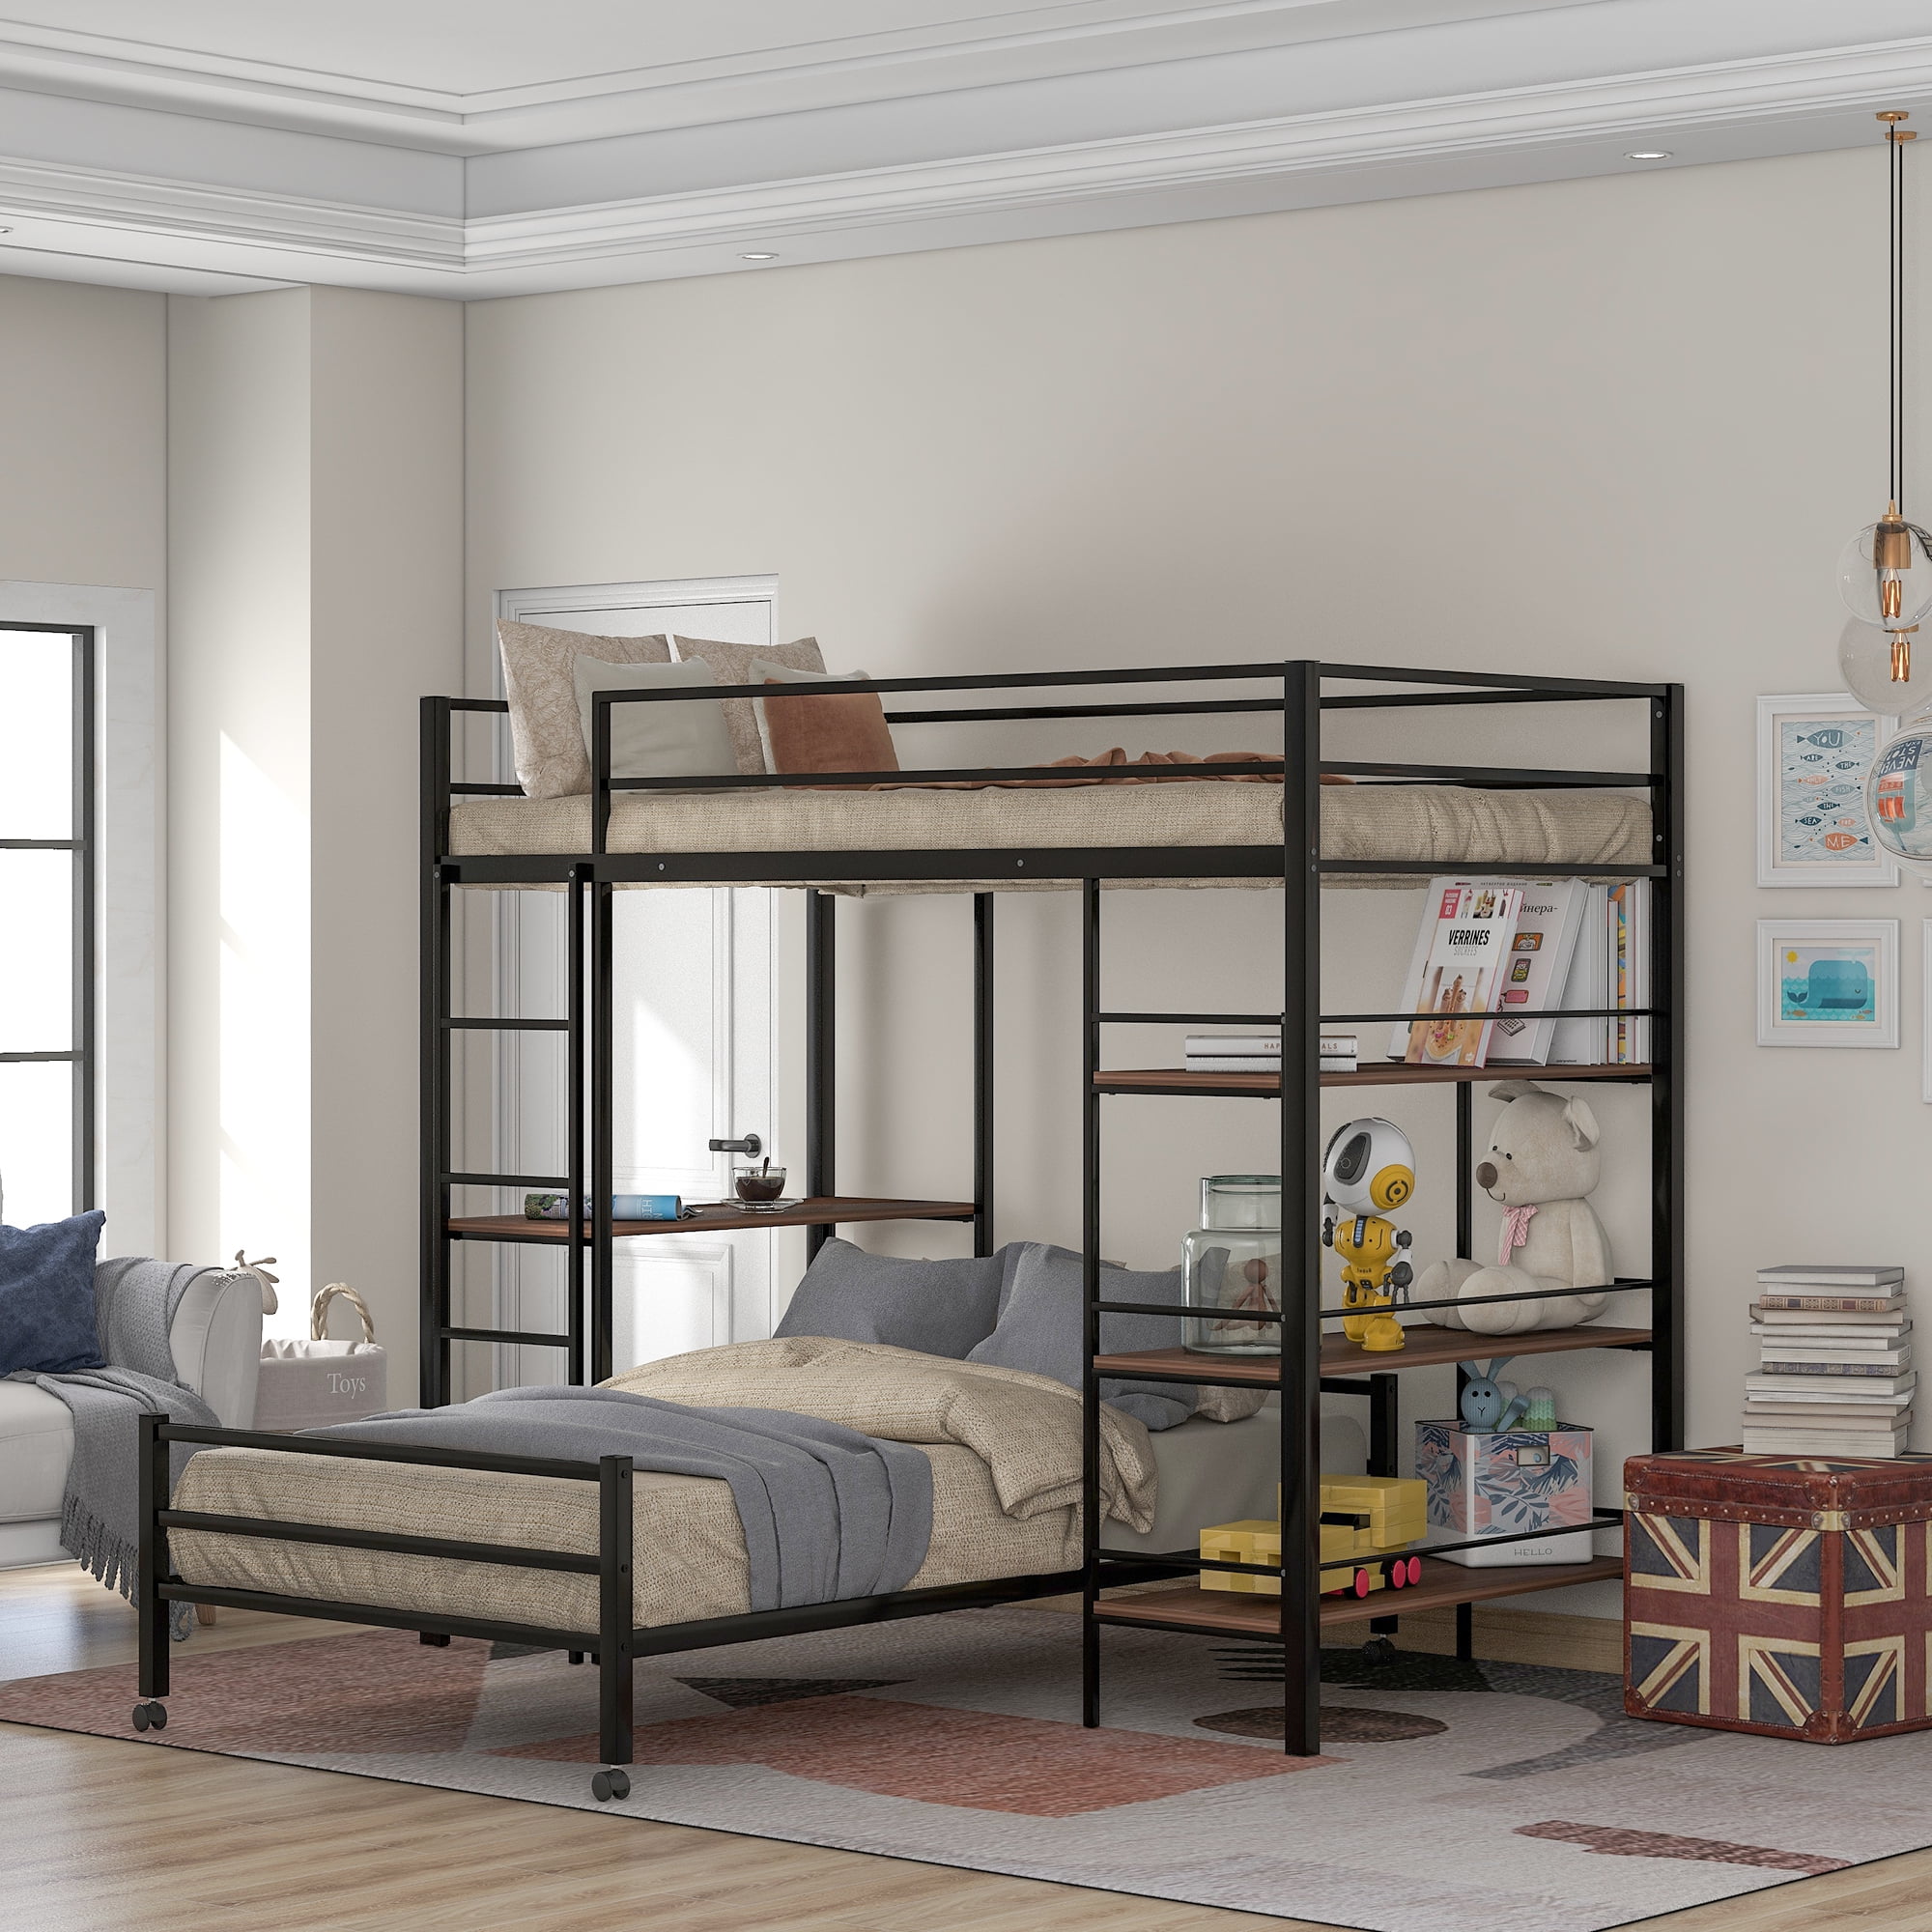 Euroco Metal Bunk Bed With Desk Twin, Queen And Twin Bunk Bed With Desk